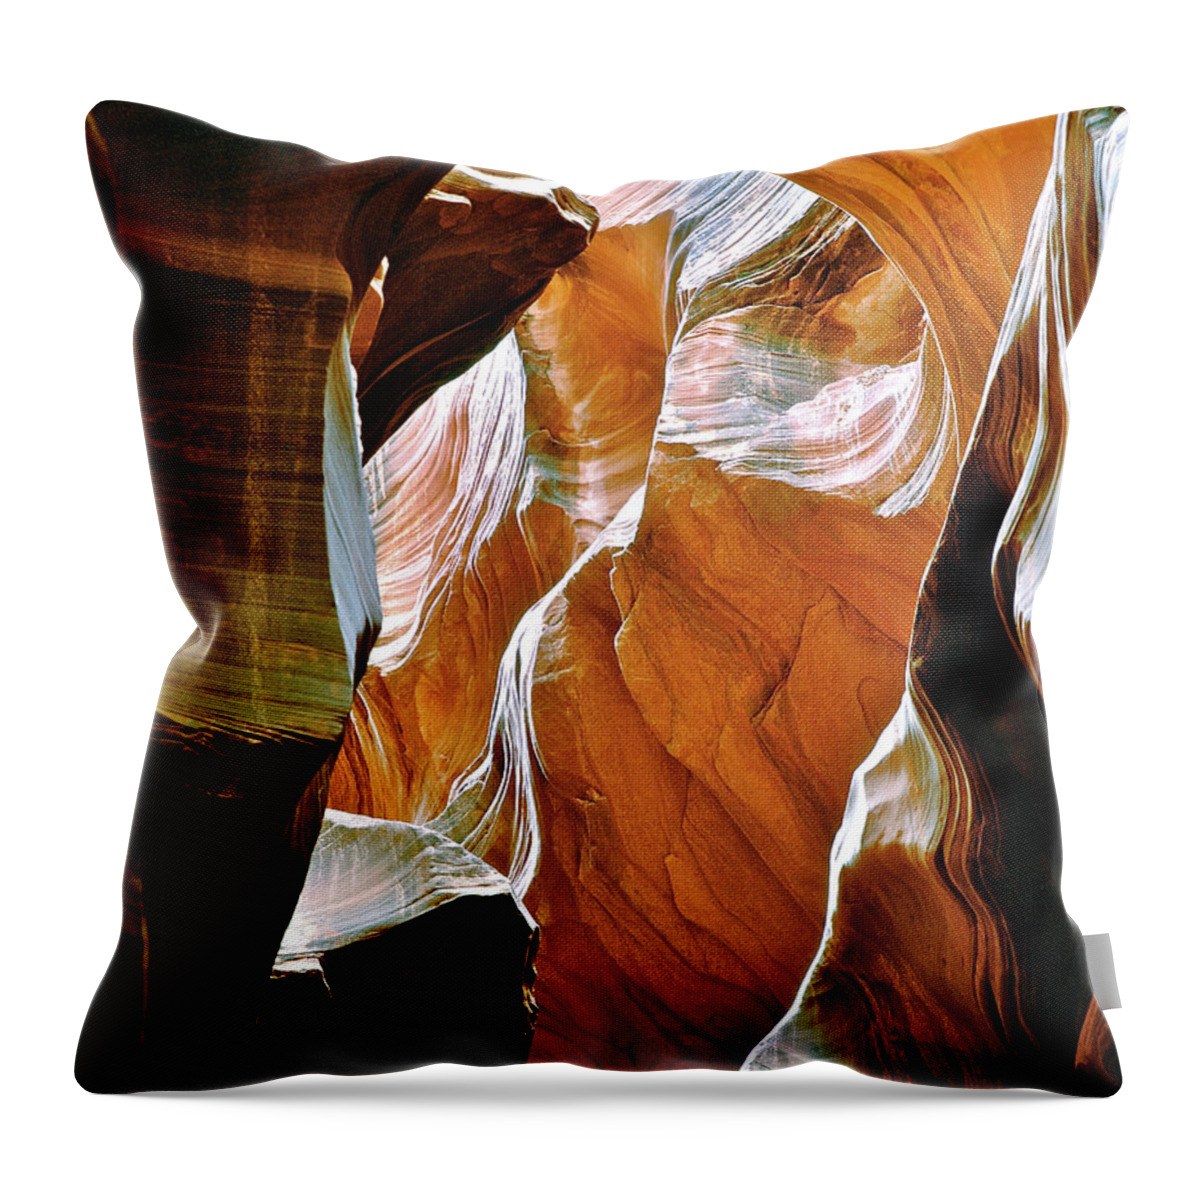 Slot Canyon Throw Pillow featuring the photograph Rattlesnake Canyon by Ed Riche